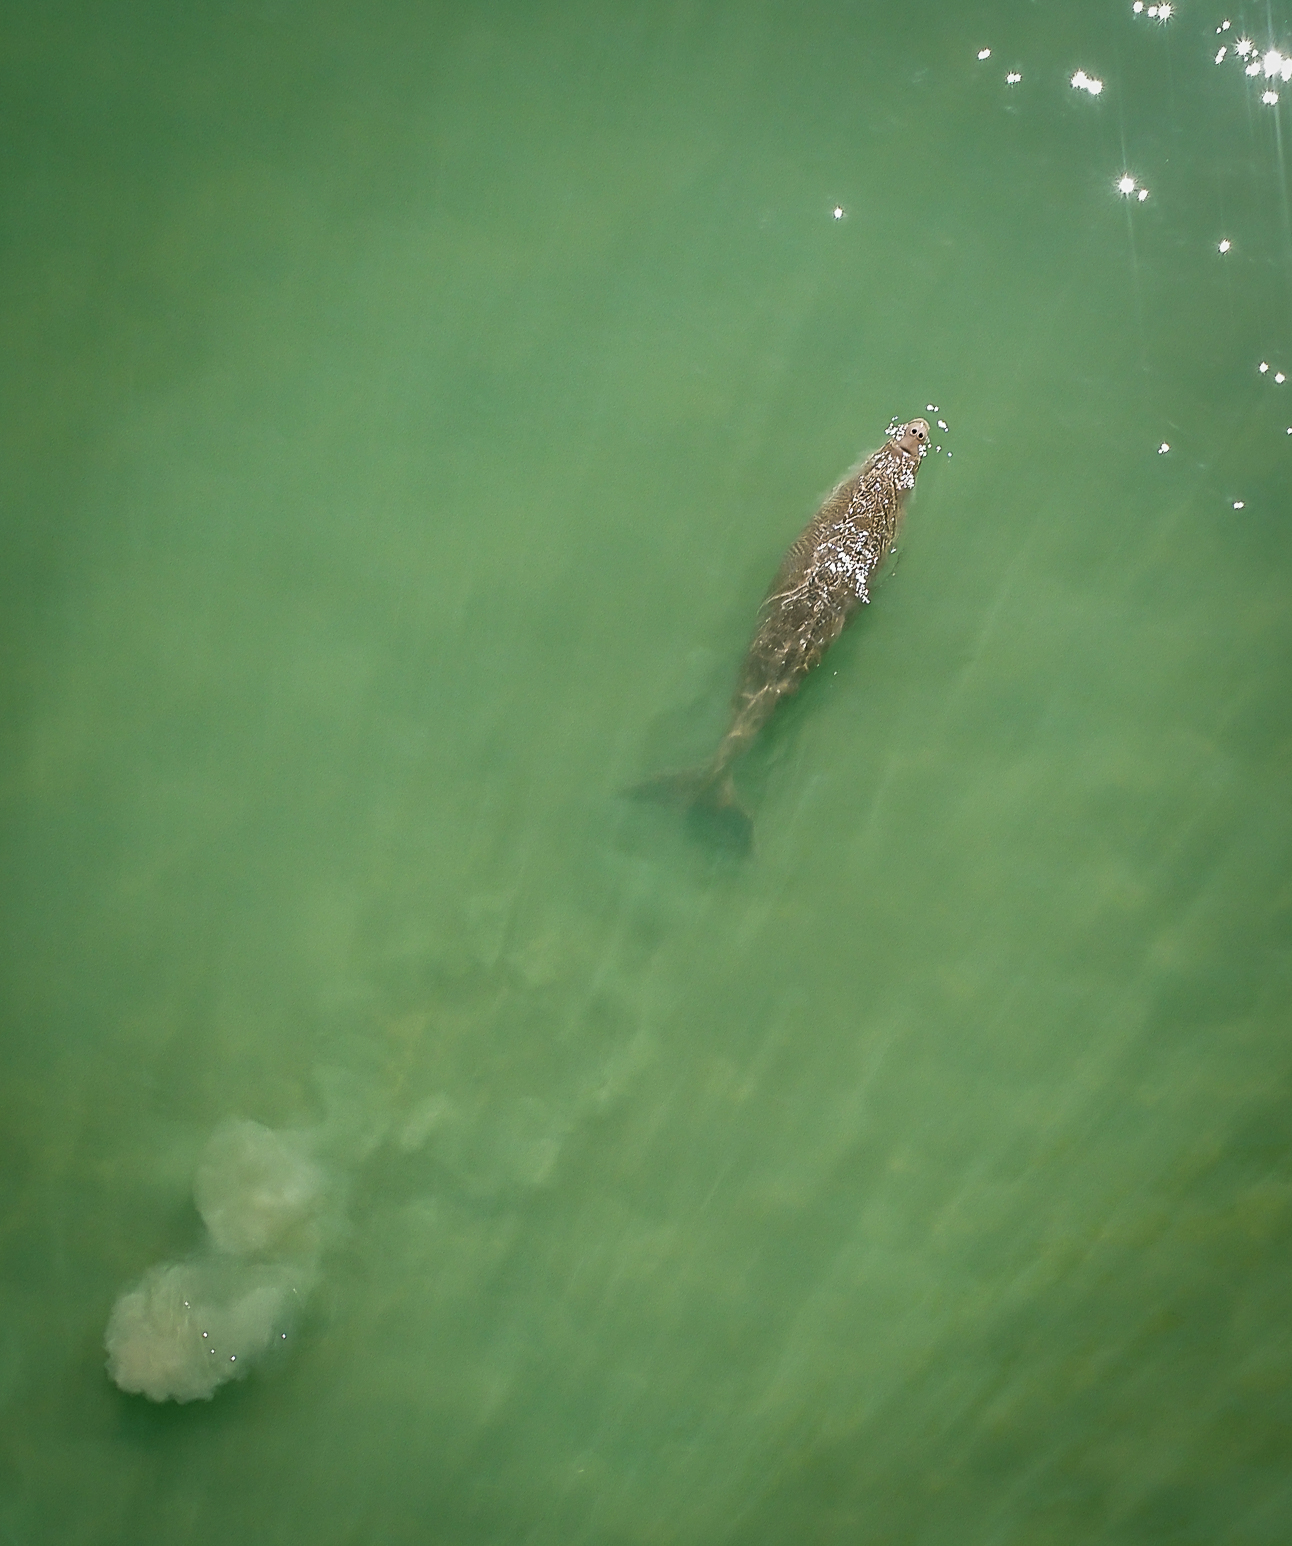 Dugong reproductive behaviour in Koh Libong, Thailand: observations using drones